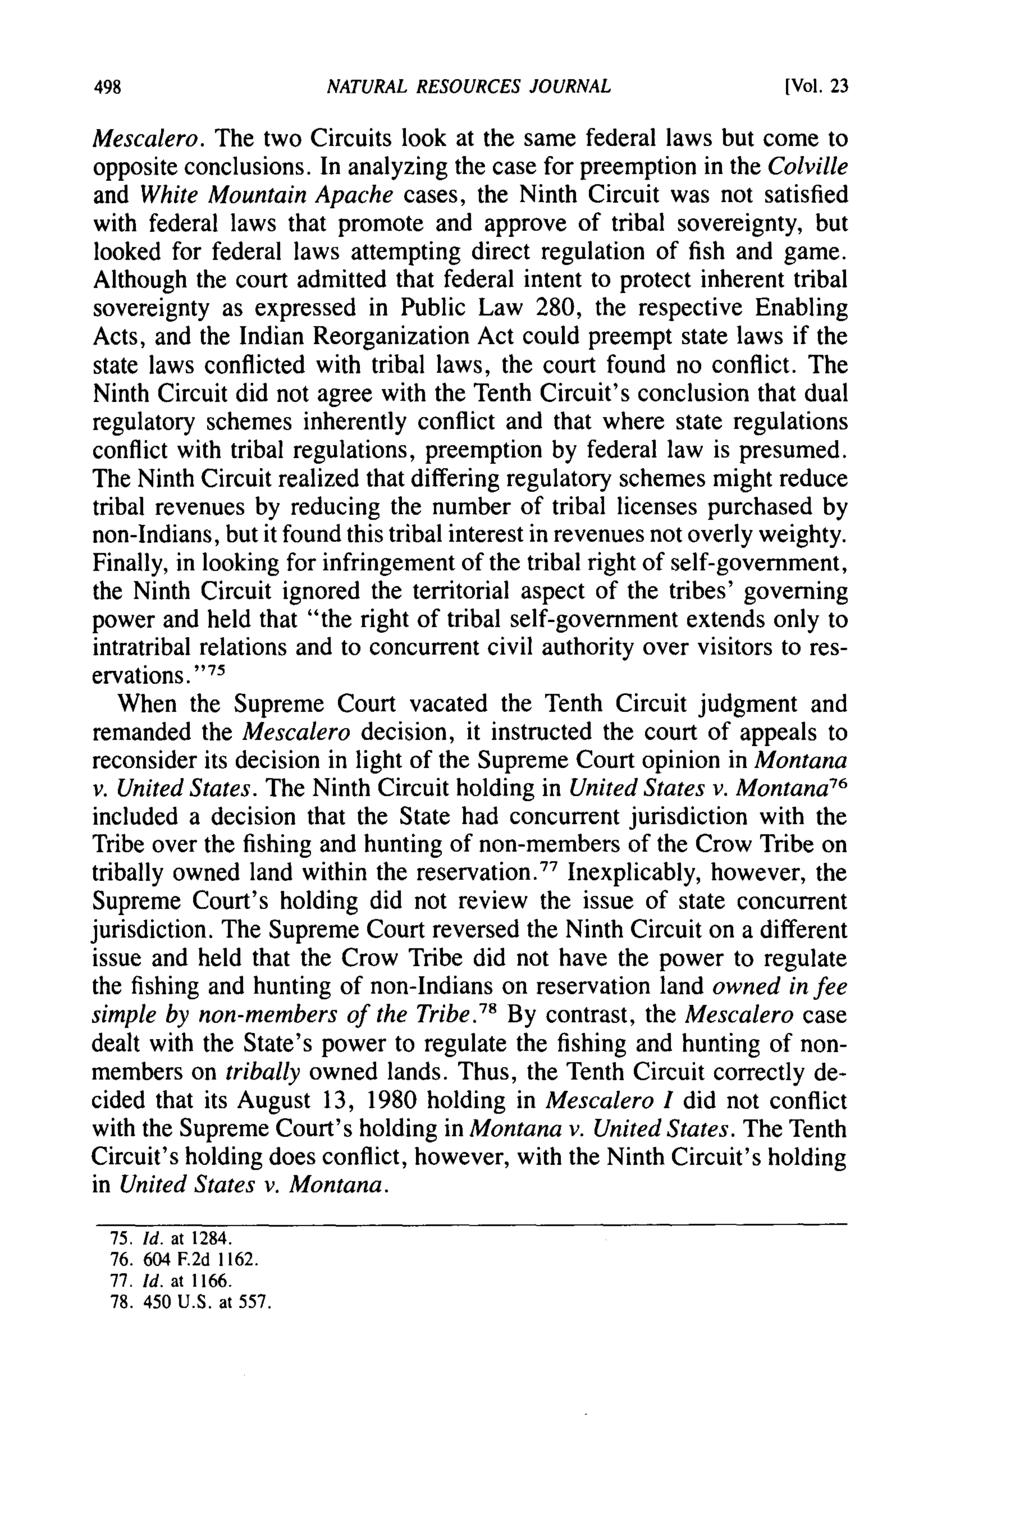 NATURAL RESOURCES JOURNAL [Vol. 23 Mescalero. The two Circuits look at the same federal laws but come to opposite conclusions.